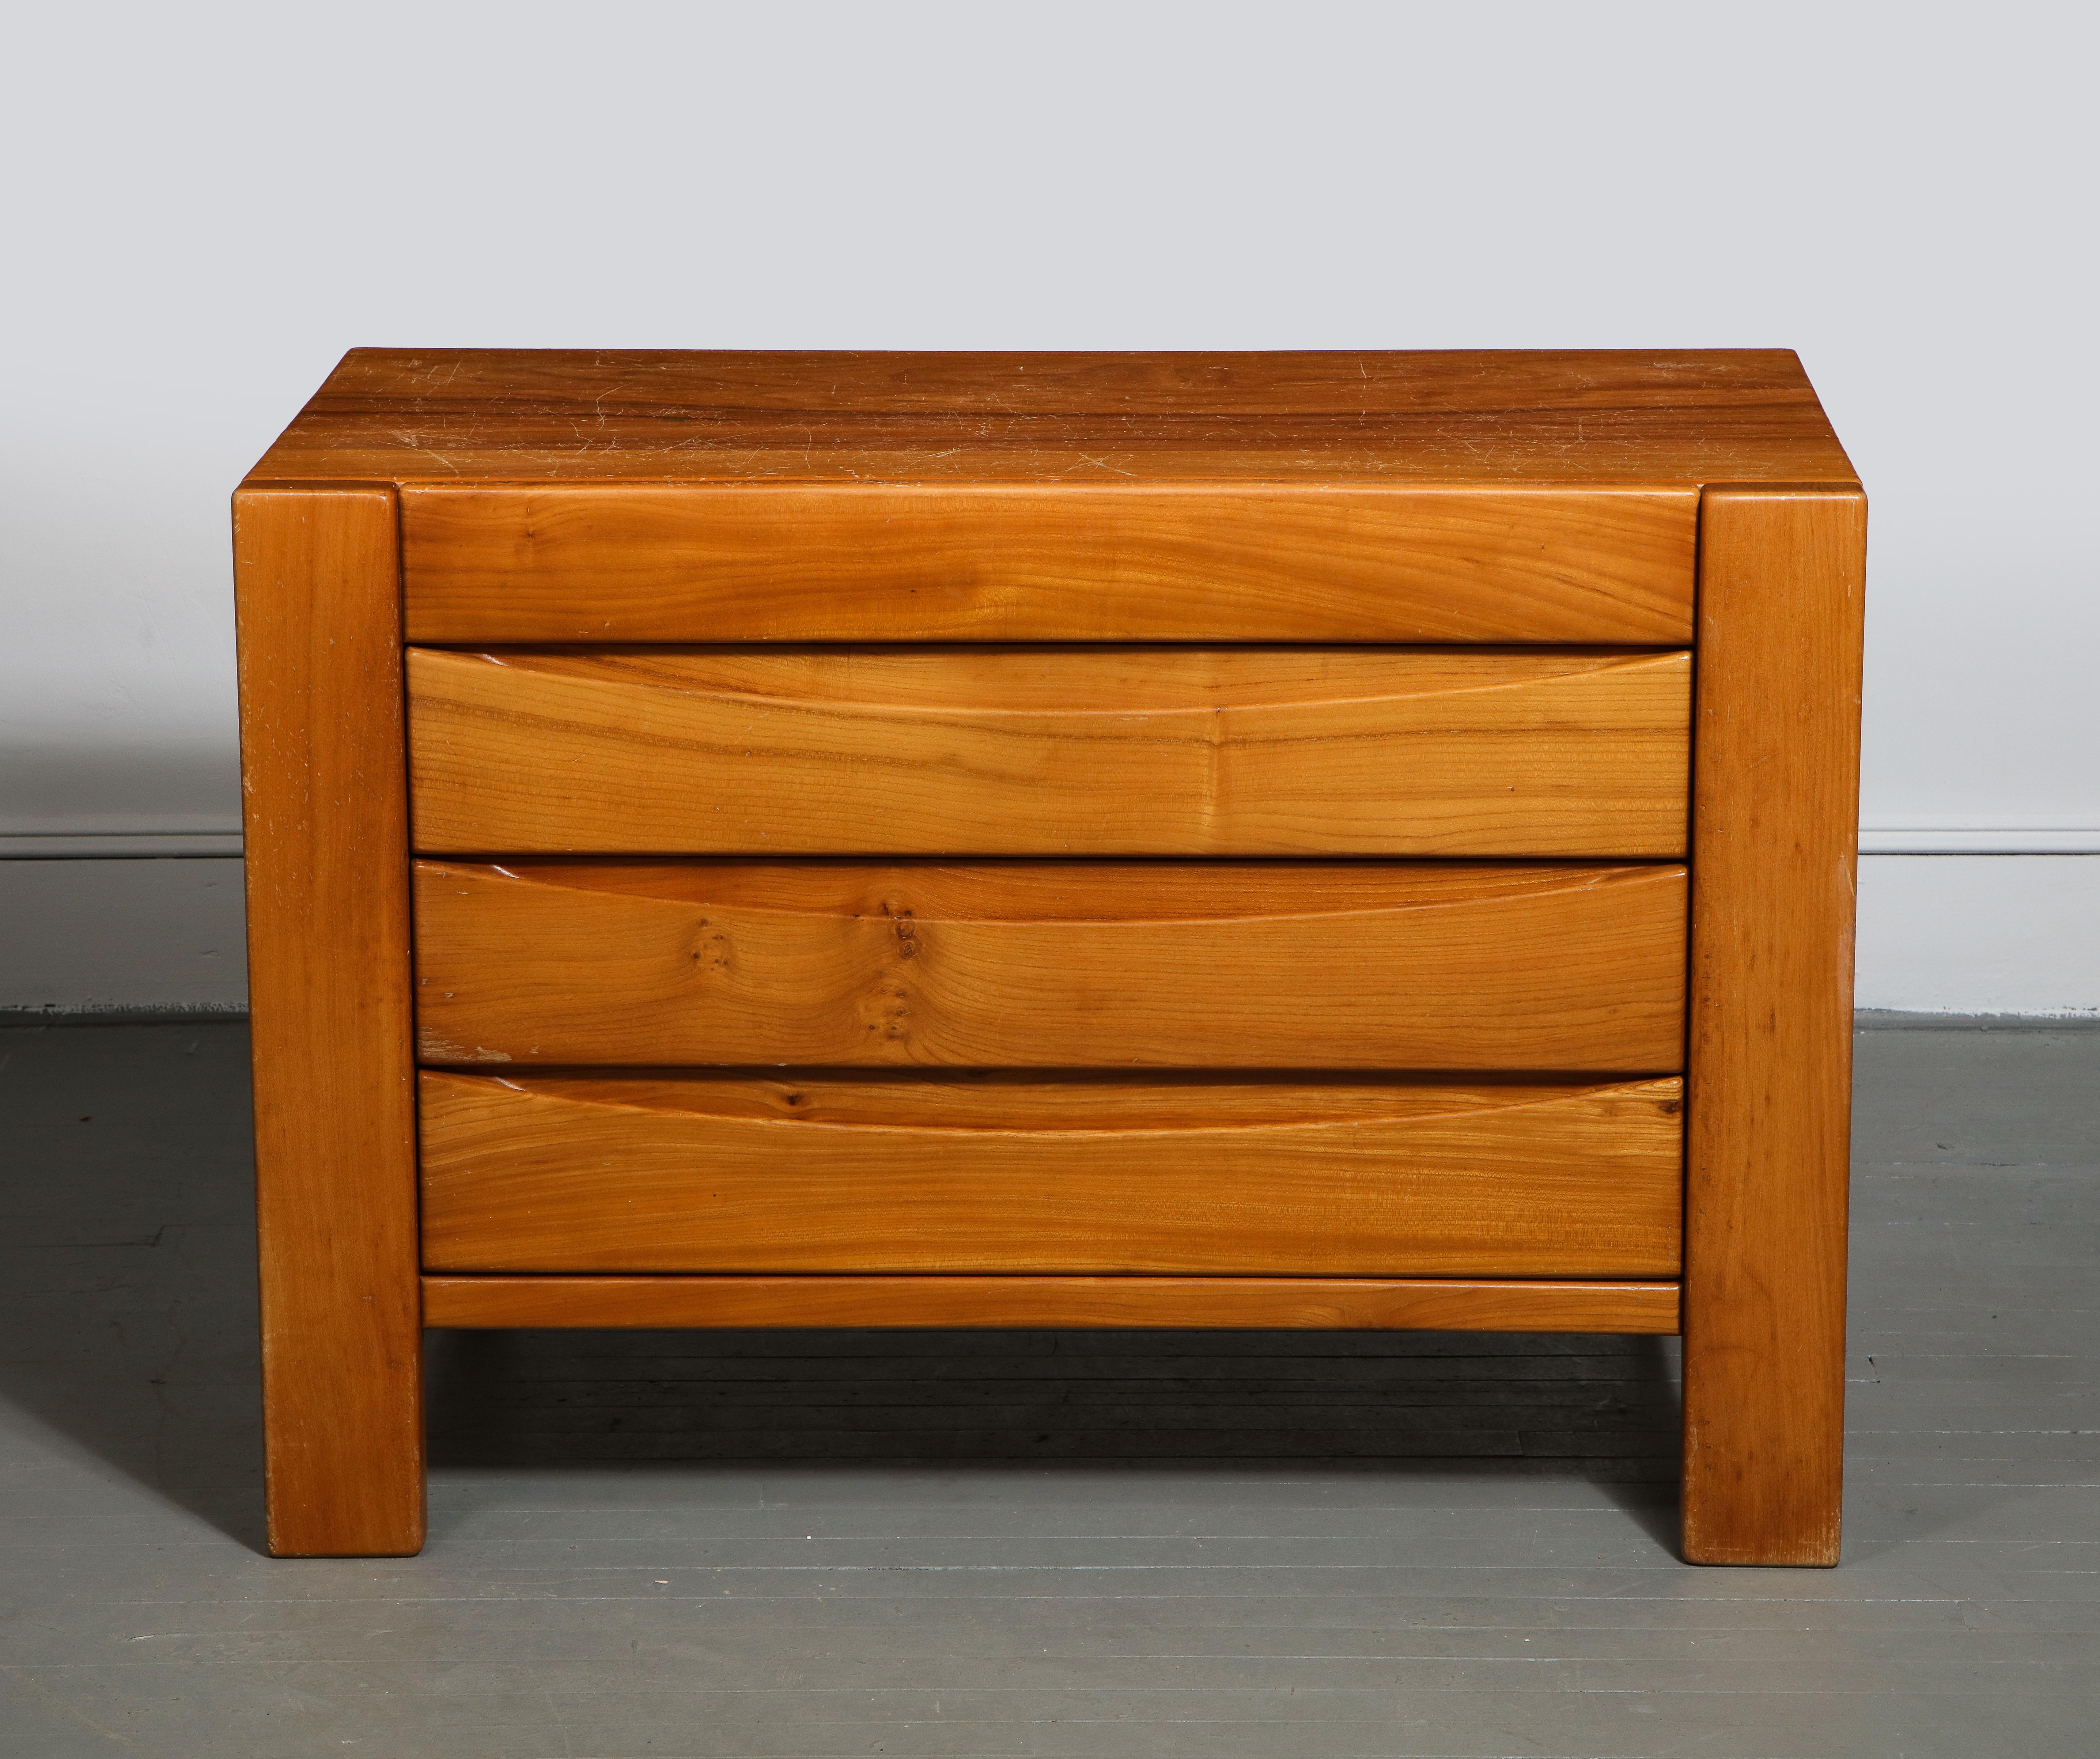 Elm commode by Maison Regain, France, c. 1970s. 

This modest yet sophisticated commode consists of a study elm construction, plank legs, and three drawers with handsome dovetail joints -- all quintessential trademarks of Maison Regain's late 20th